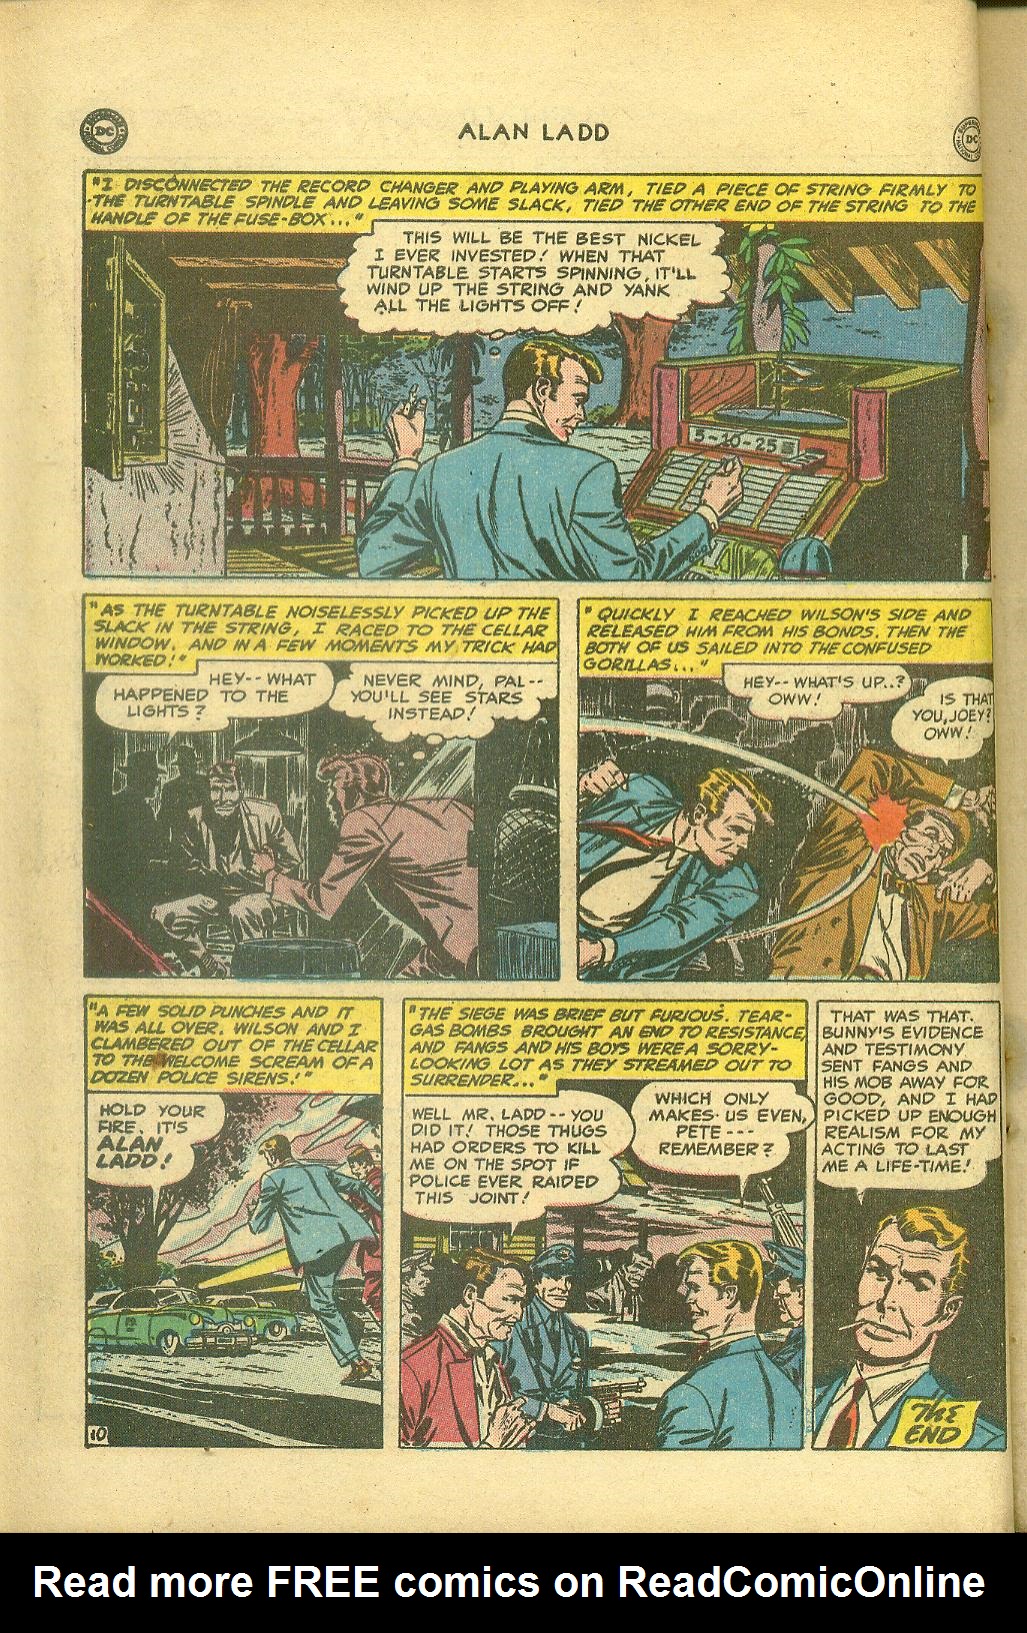 Read online Adventures of Alan Ladd comic -  Issue #2 - 12